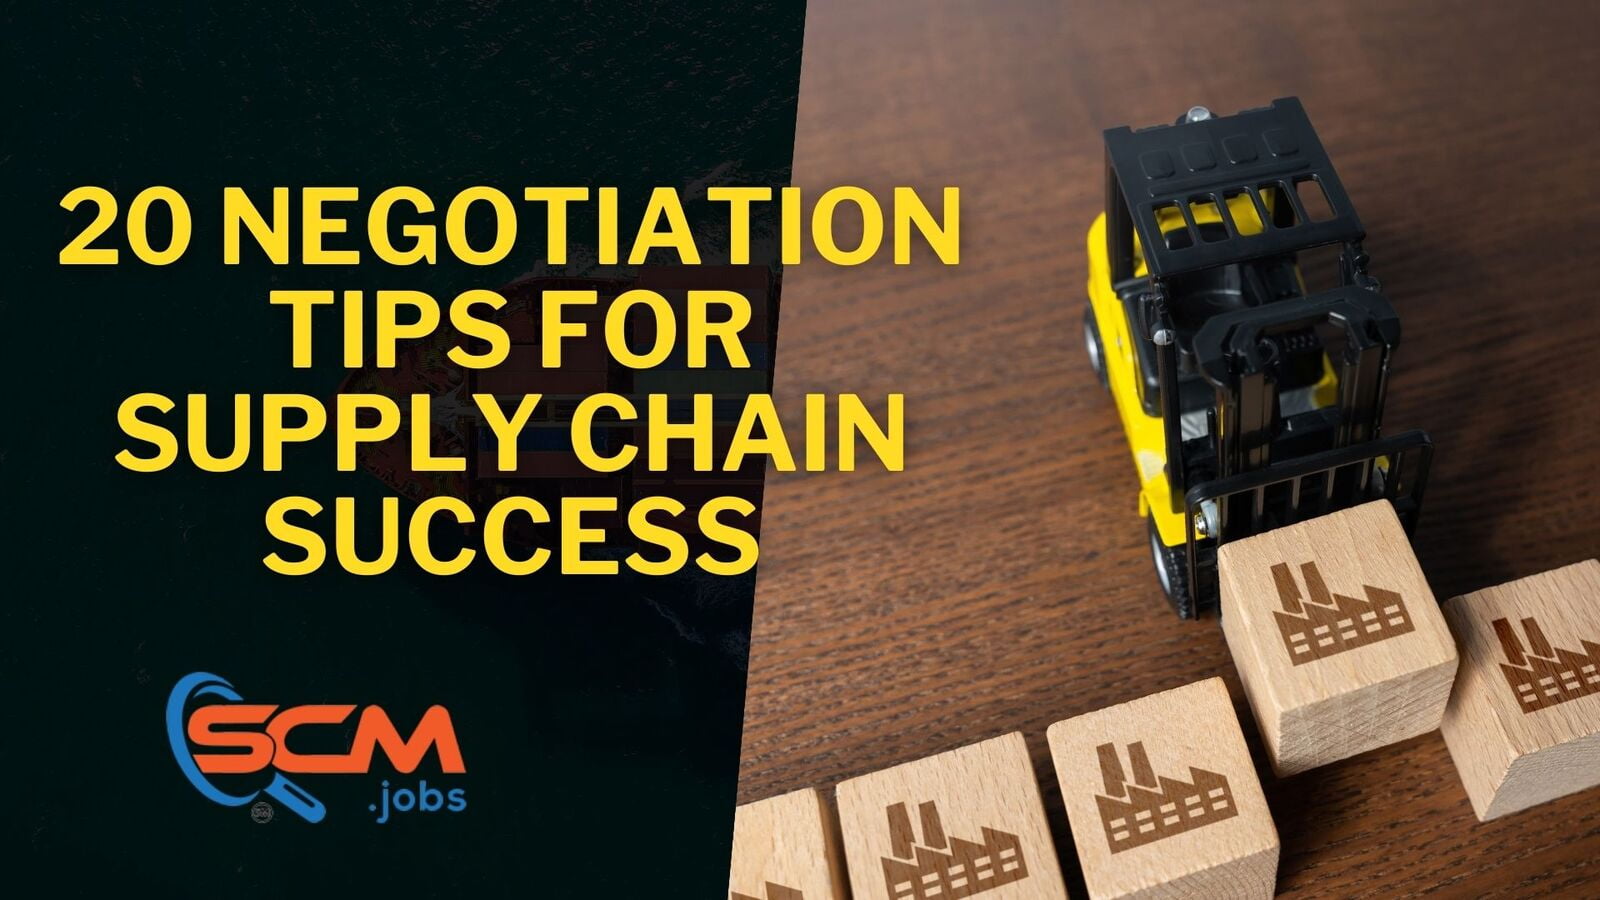 20 Negotiation Tips for Supply Chain Success: Become a Superstar!